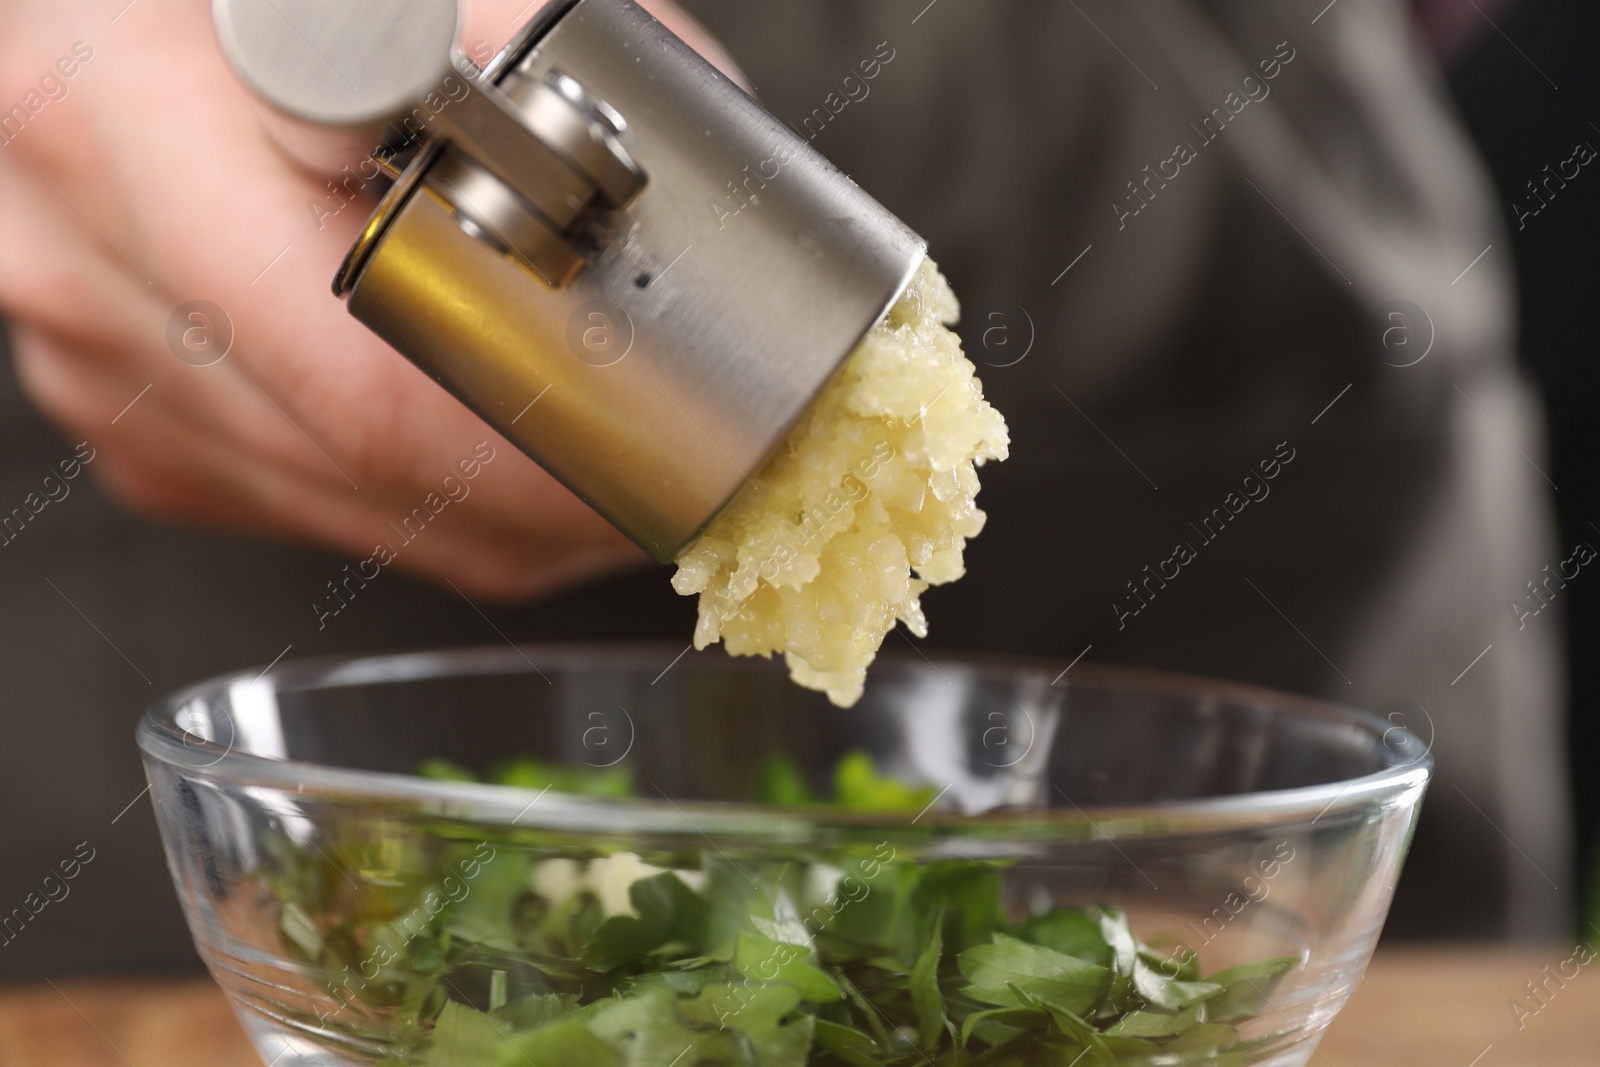 Photo of Woman squeezing garlic with press into bowl with parsley, closeup